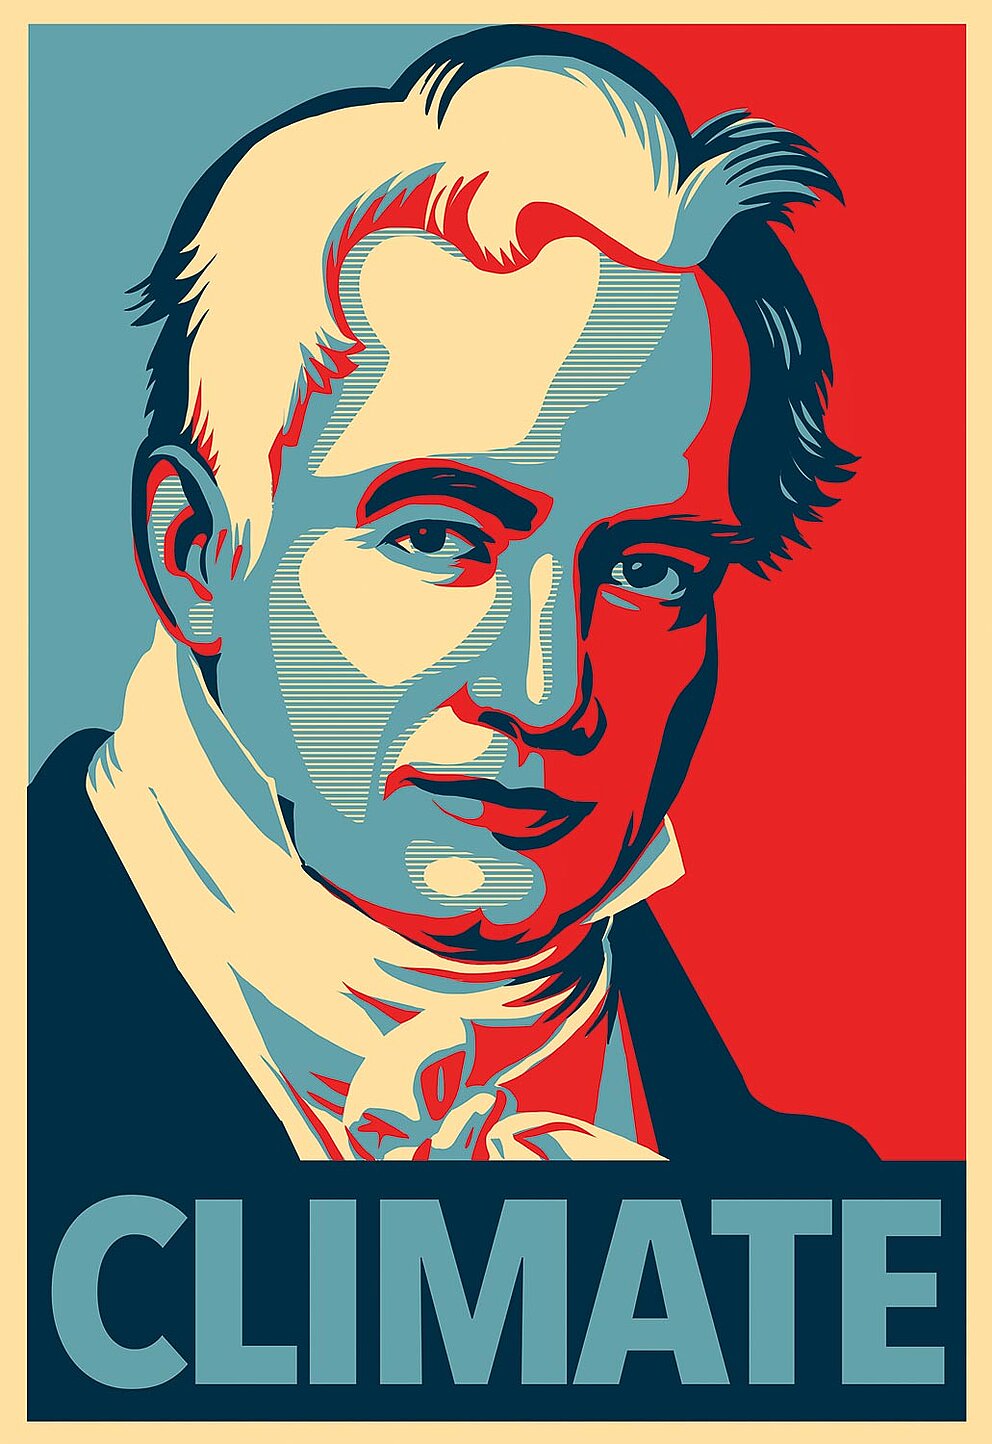 Humboldt as climate saver, based on the Barack Obama poster "Hope" by the artist Shepard Fairey from the 2008 US presidential election campaign.